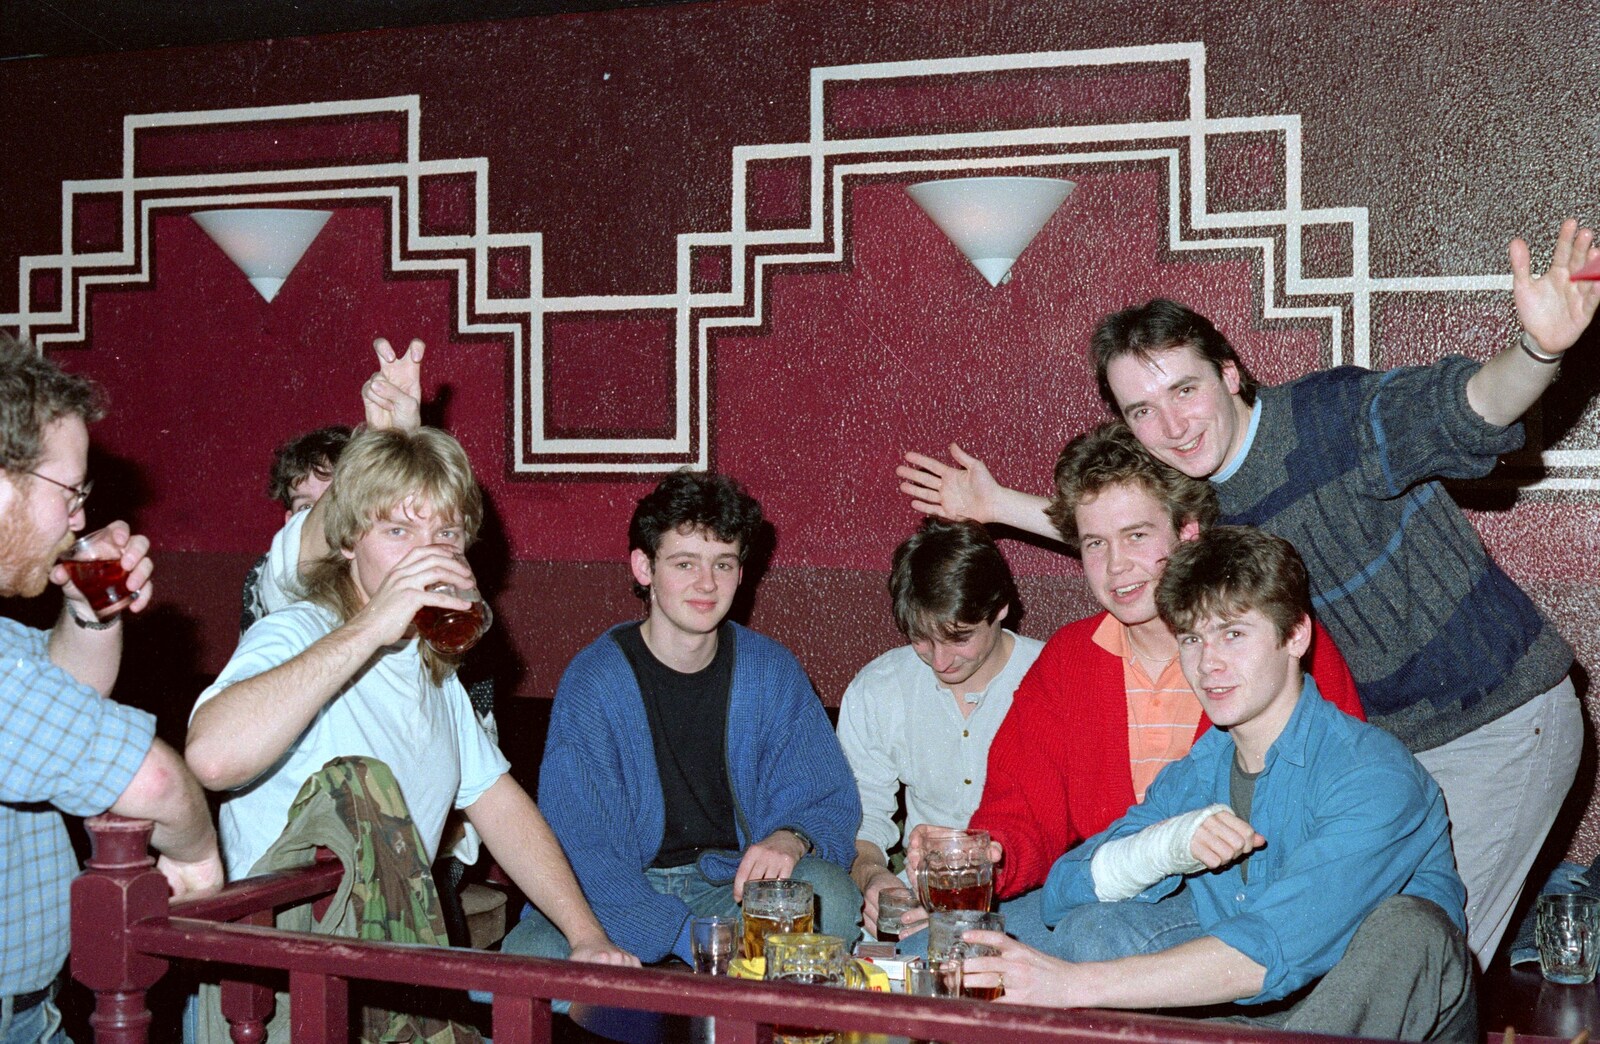 Another bunch of boys on the beer from Uni: A Party in Snobs Nightclub, Mayflower Street, Plymouth - 18th October 1986